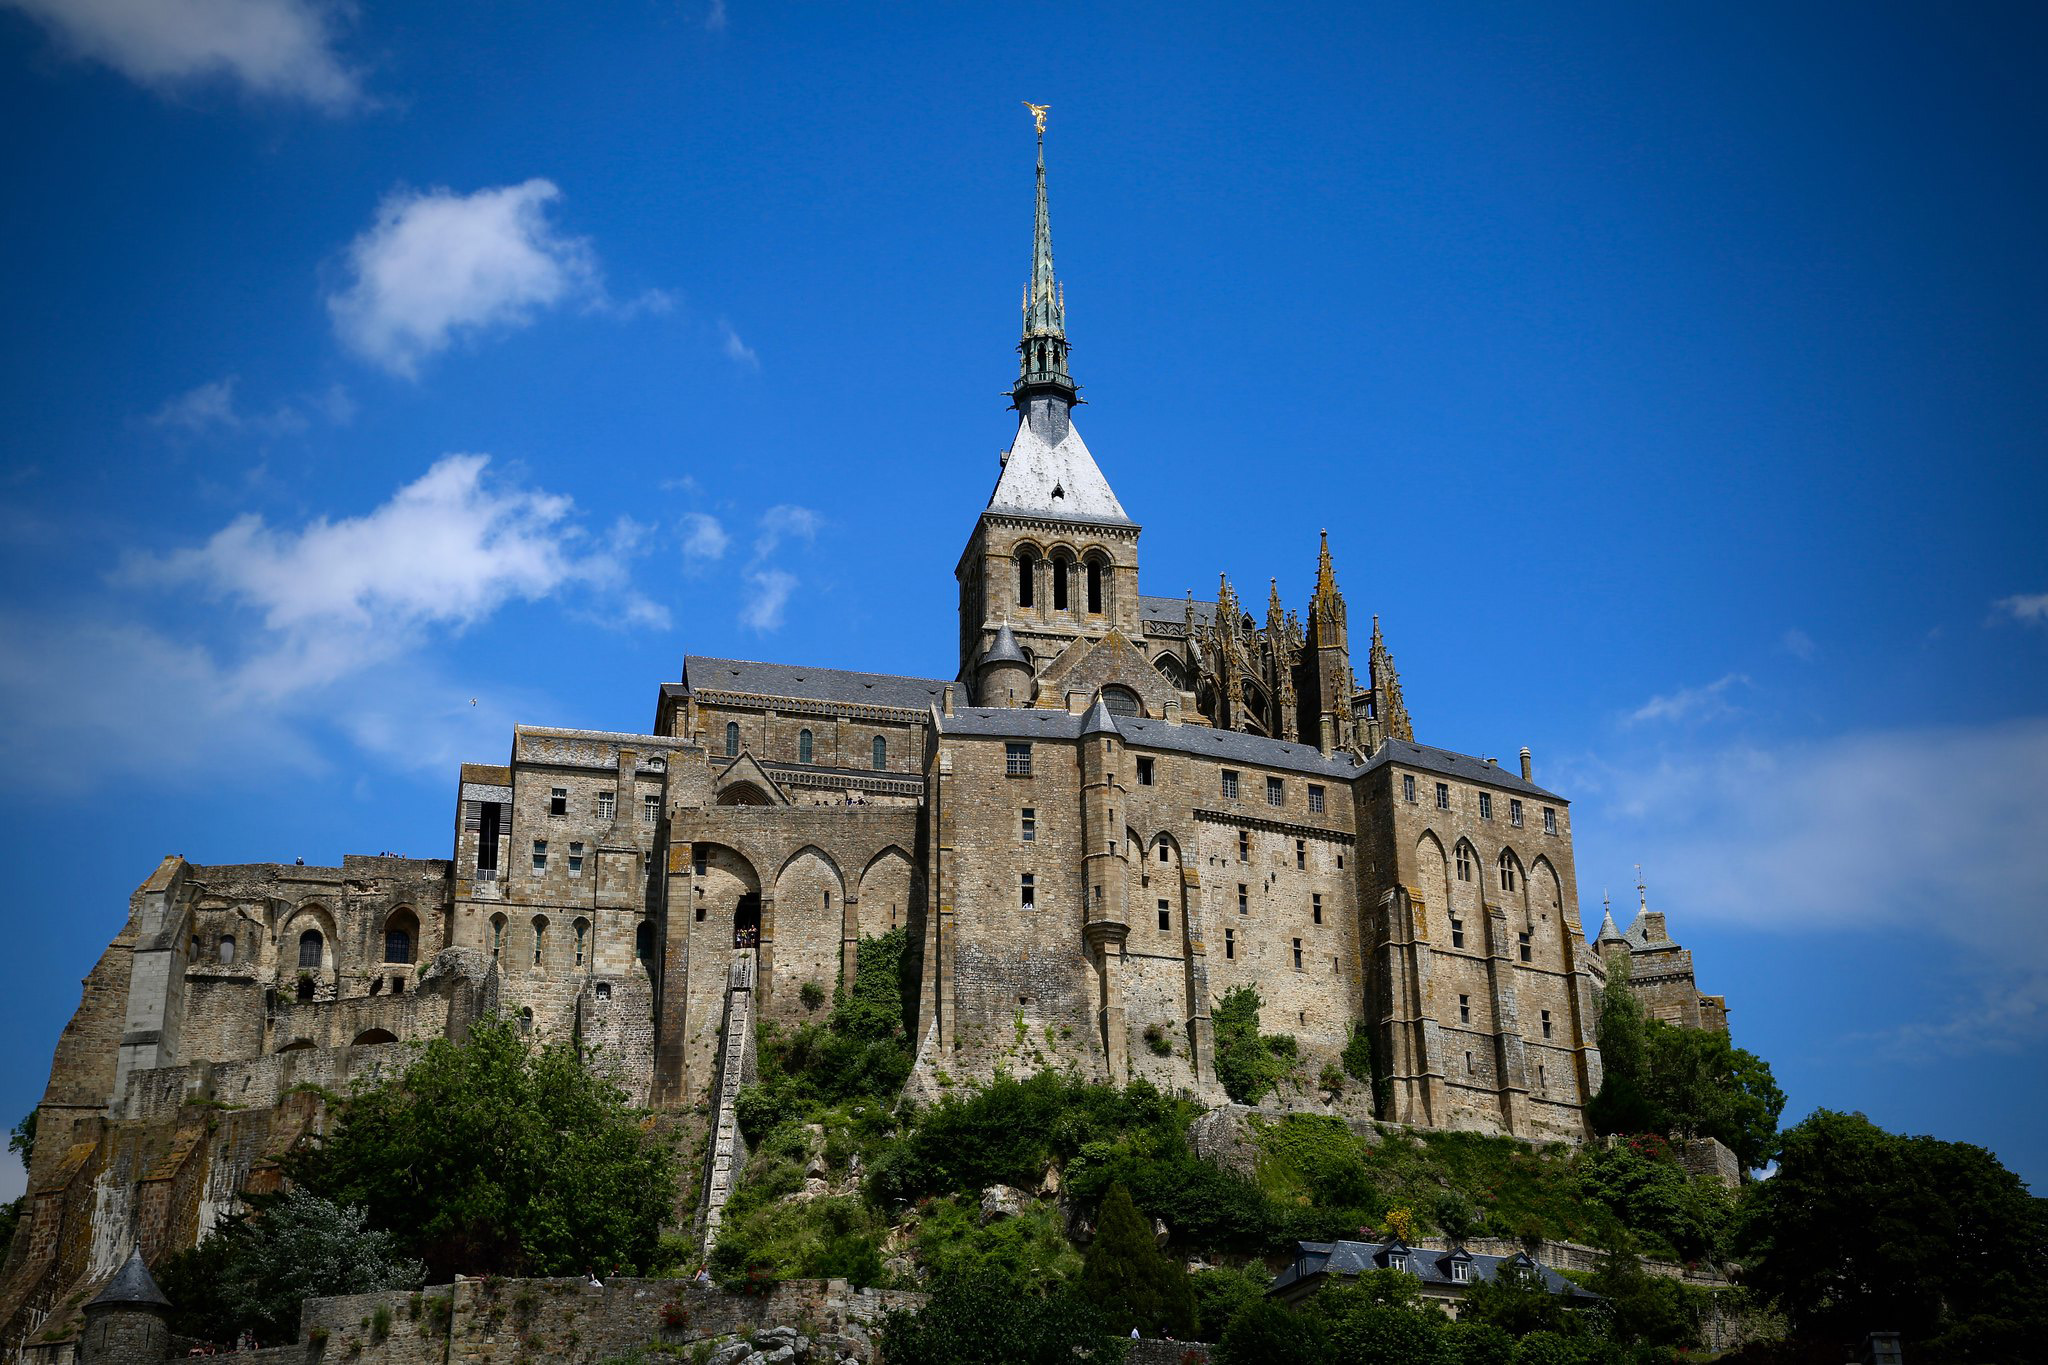 The stunning Mont-Saint-Michel was a highlight of the band’s sightseeing.